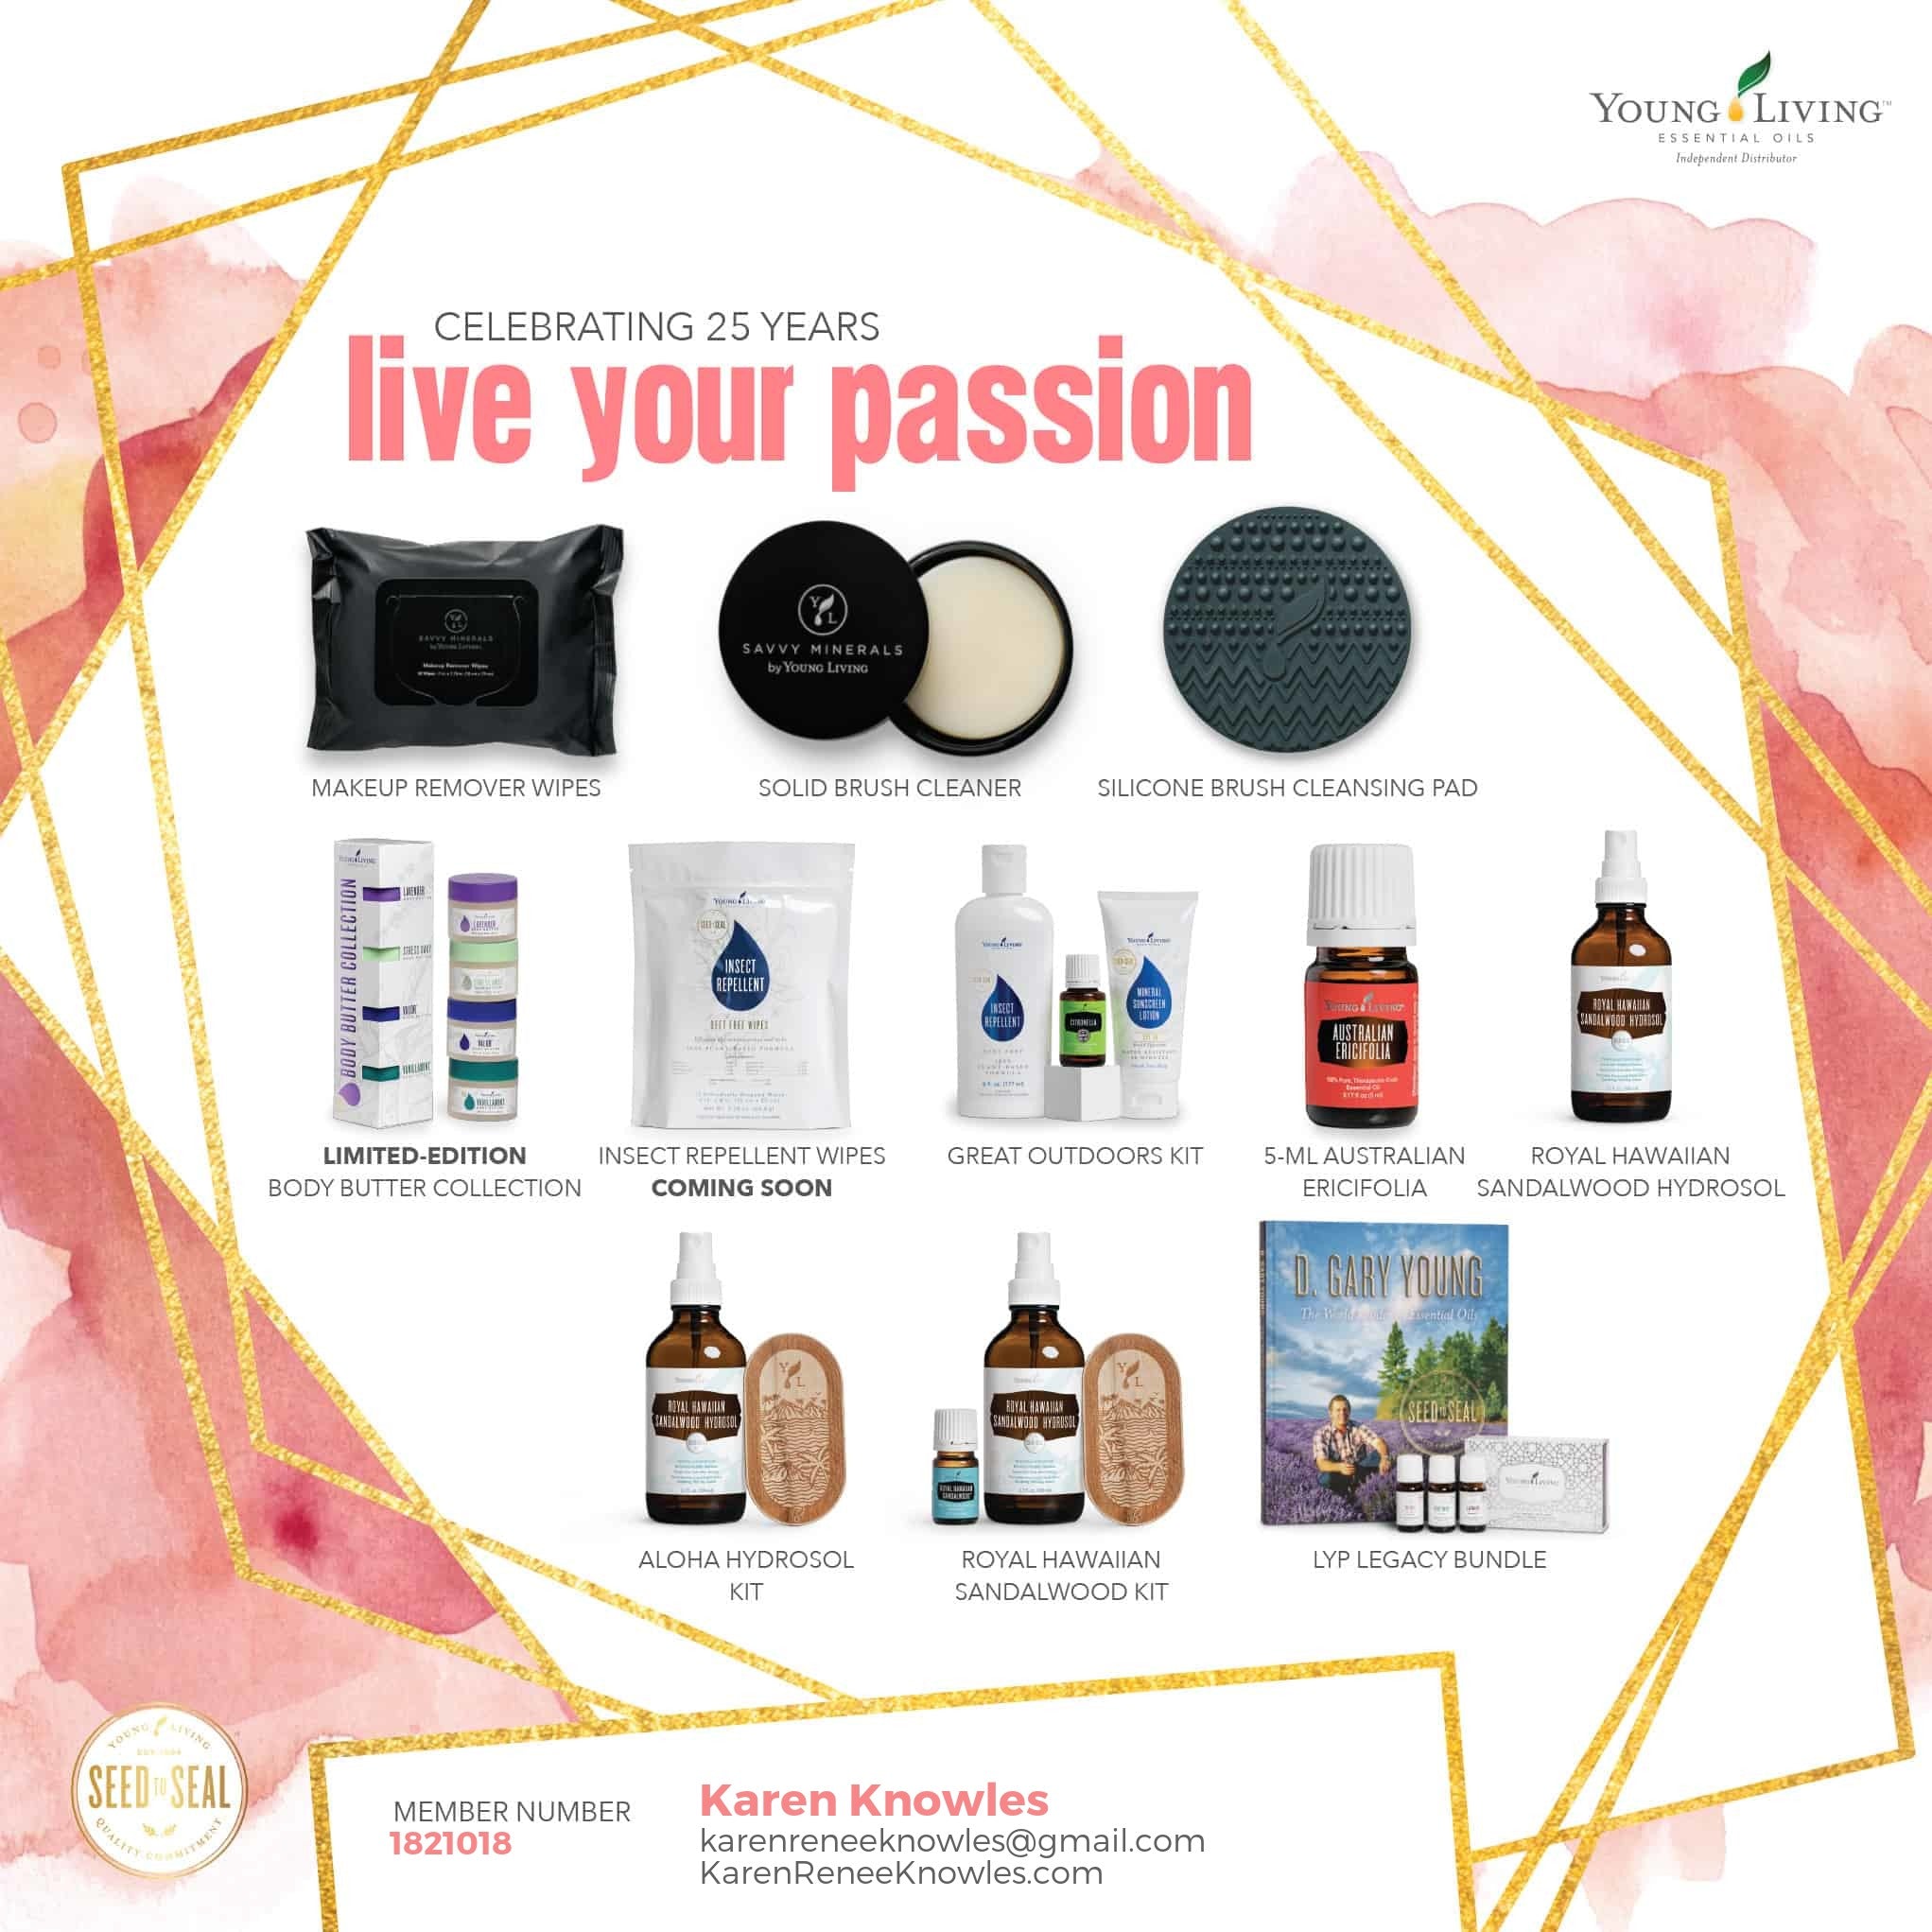 Check out Some of the Newly Launching Young Living Products!